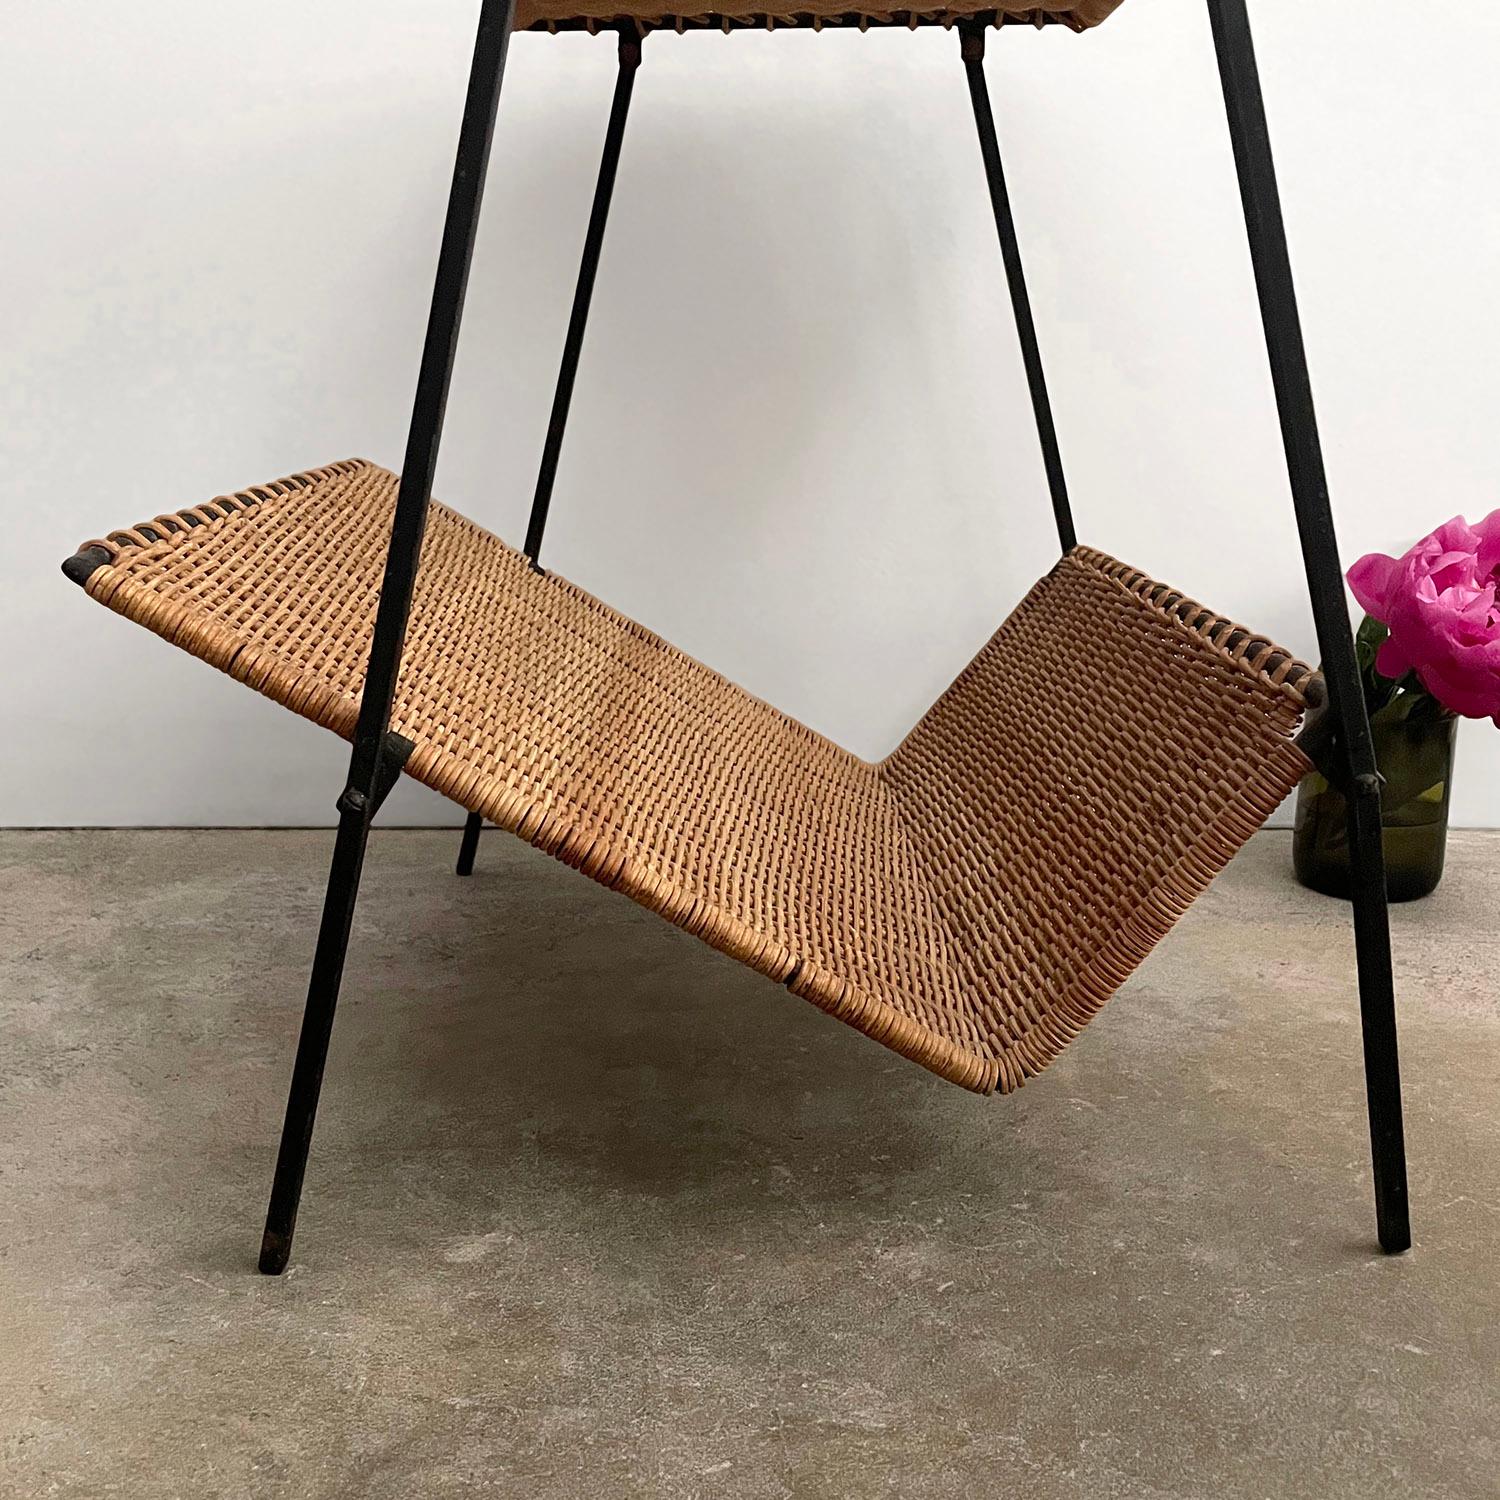 Raoul Guys French Wicker & Iron Magazine Side Table  For Sale 6